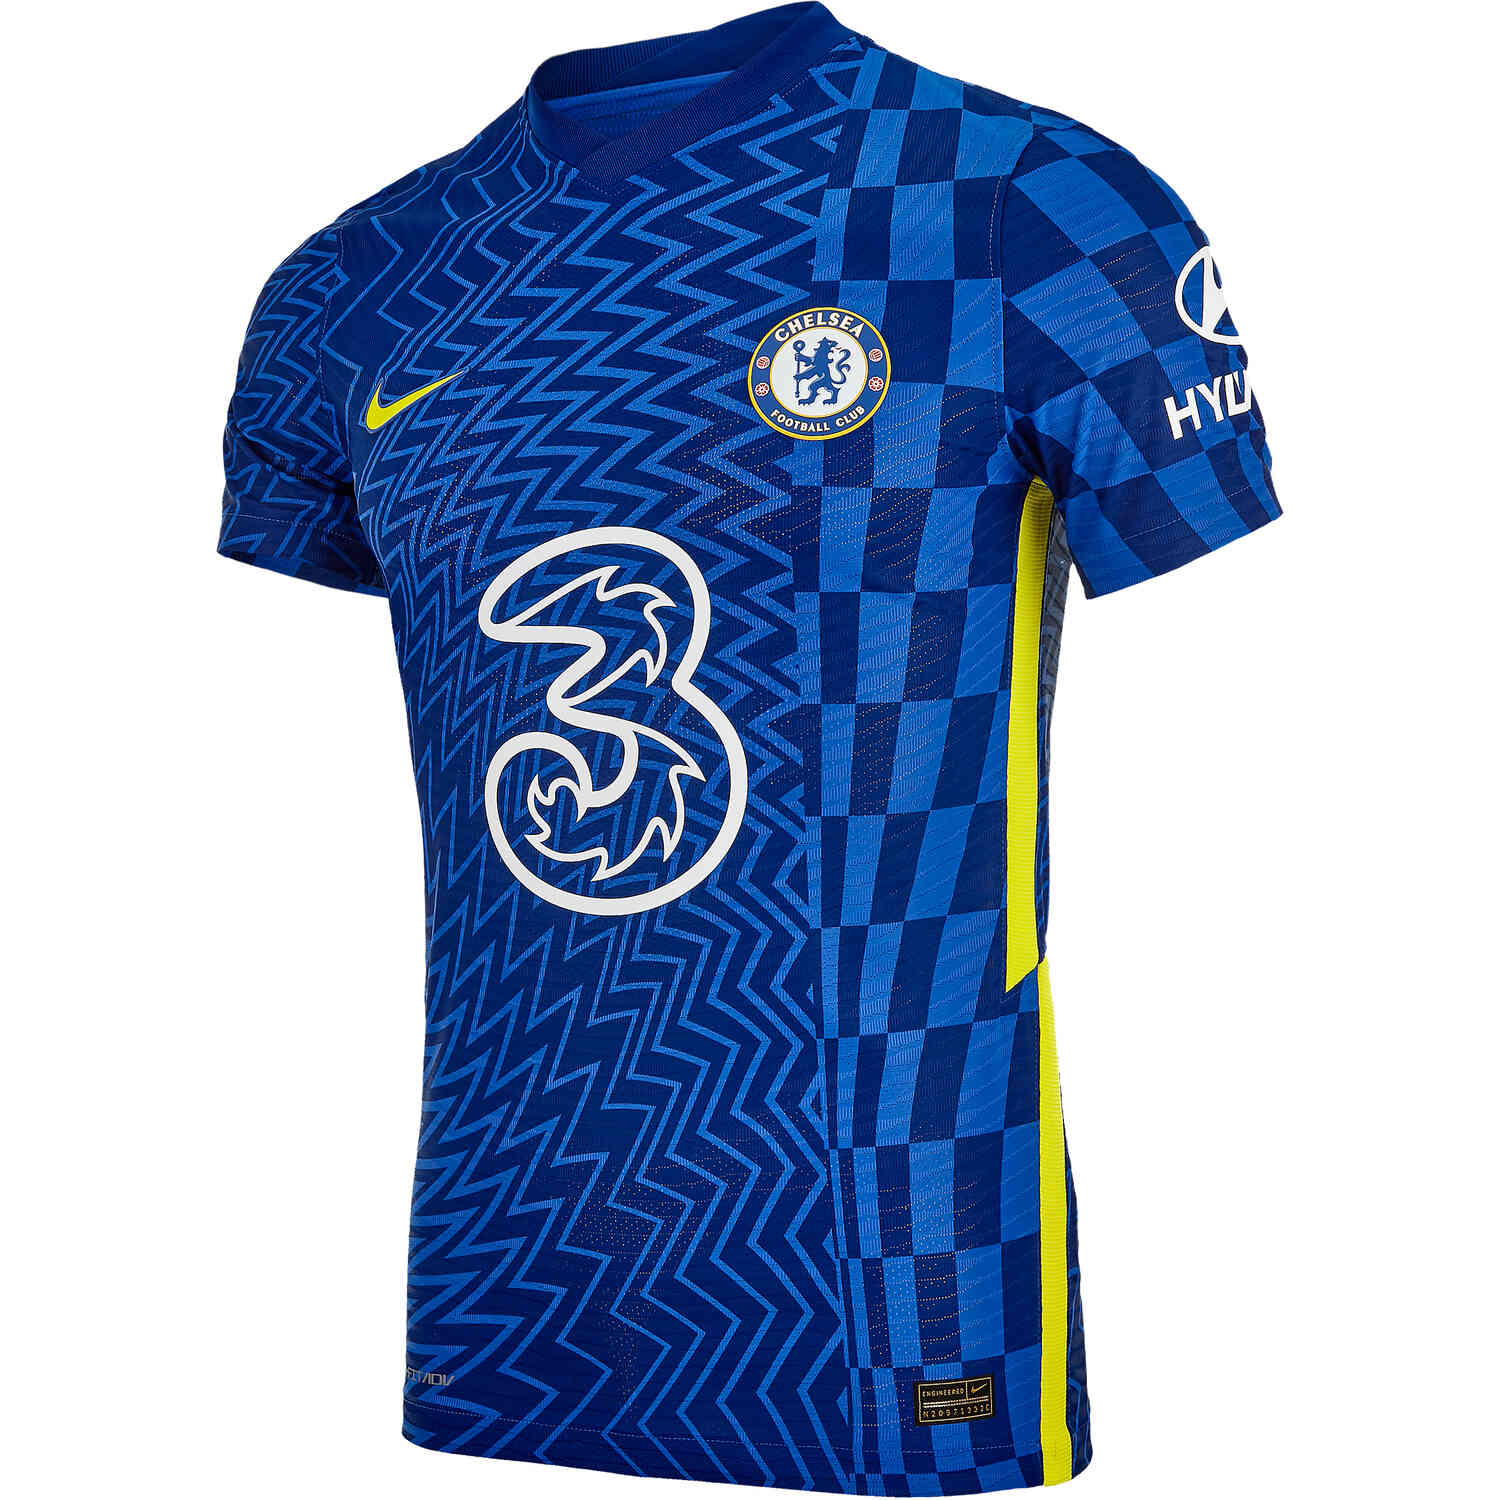 2021/22 Nike Chelsea Home Match Jersey - Soccer Master